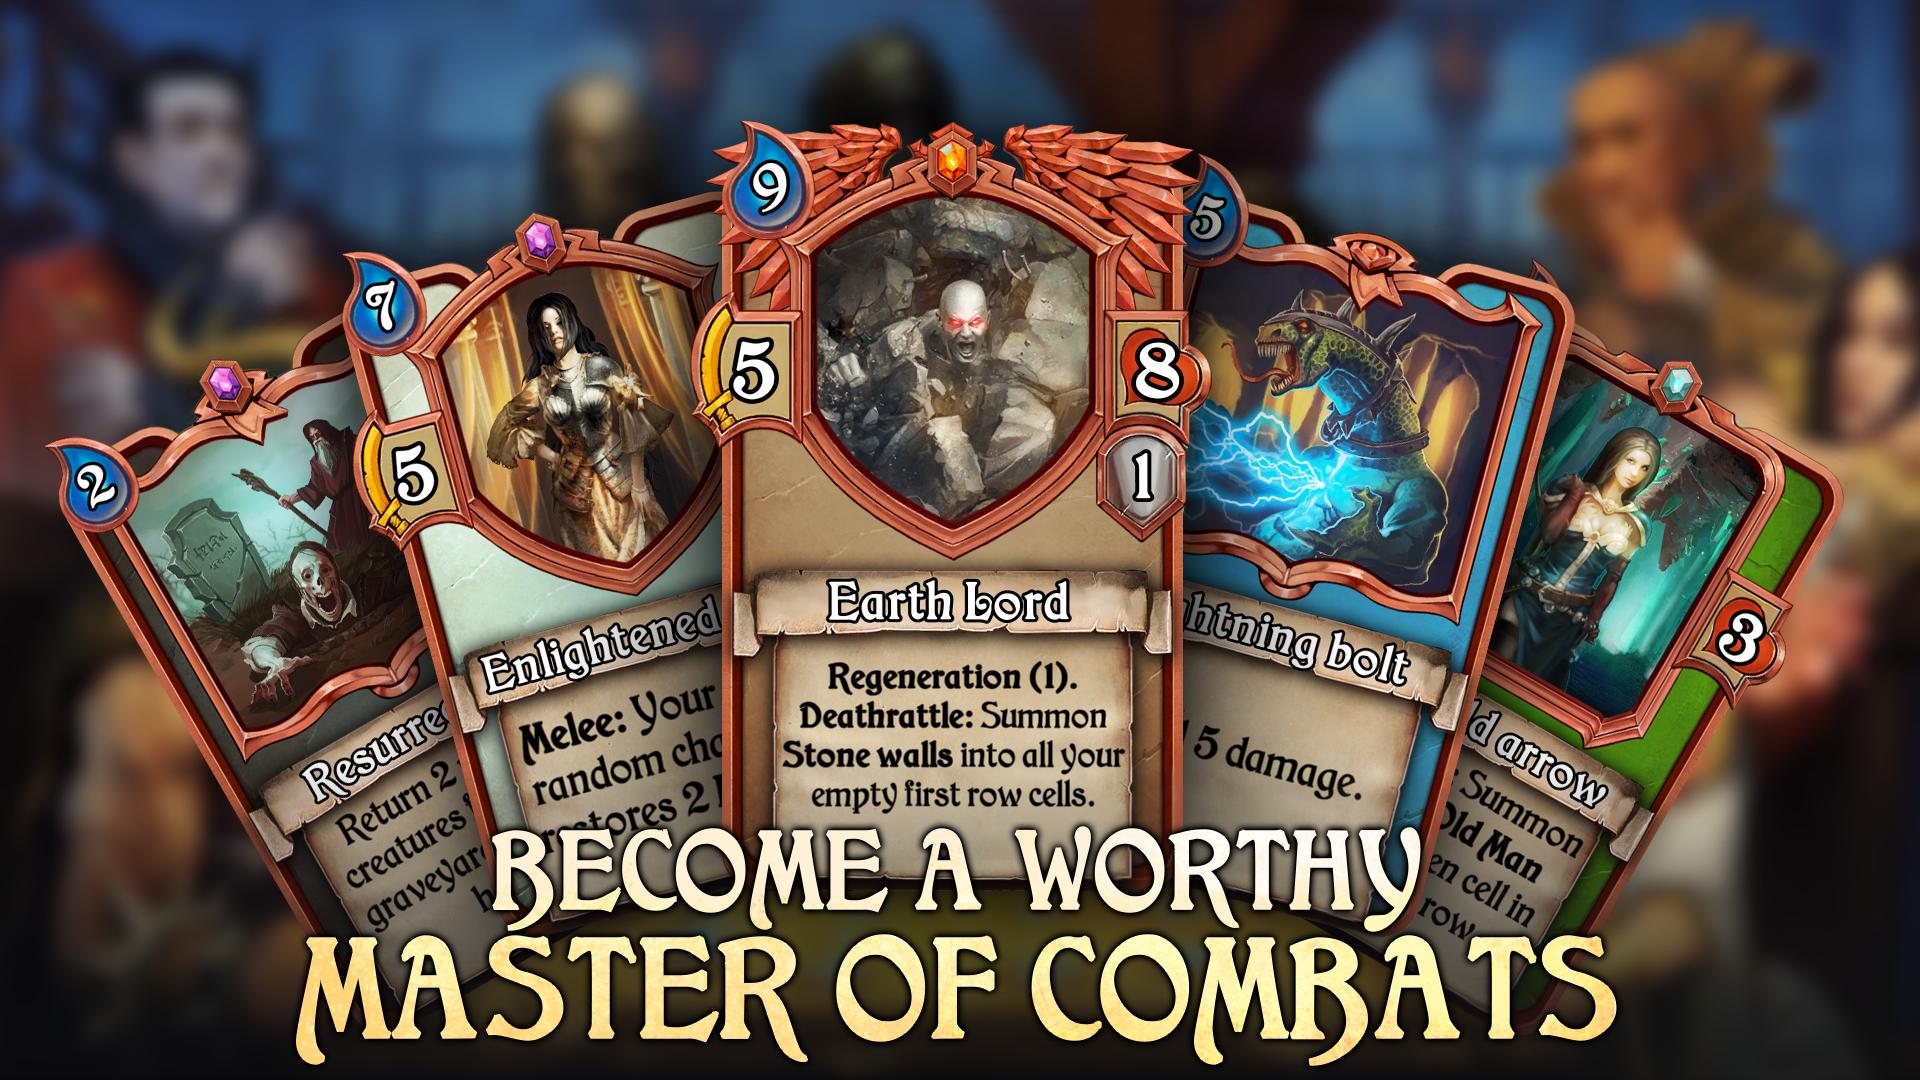 Echo of Combats Collectible card game 0.9.1 Screenshot 1